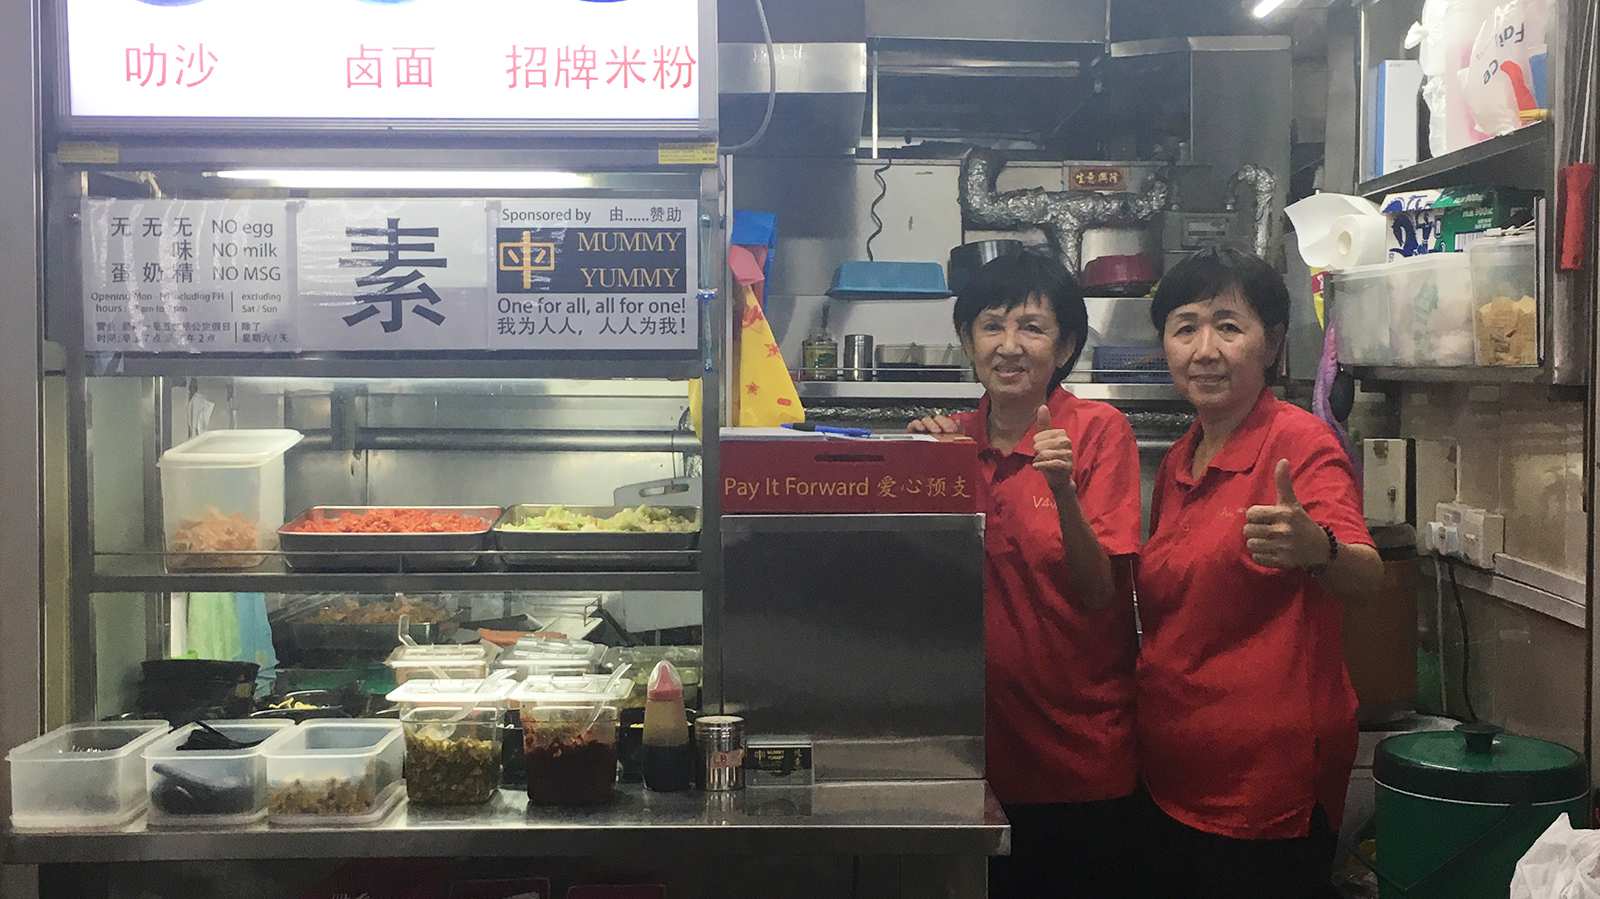 At this vegetarian food stall in West Coast Drive, the poor and needy dine for free